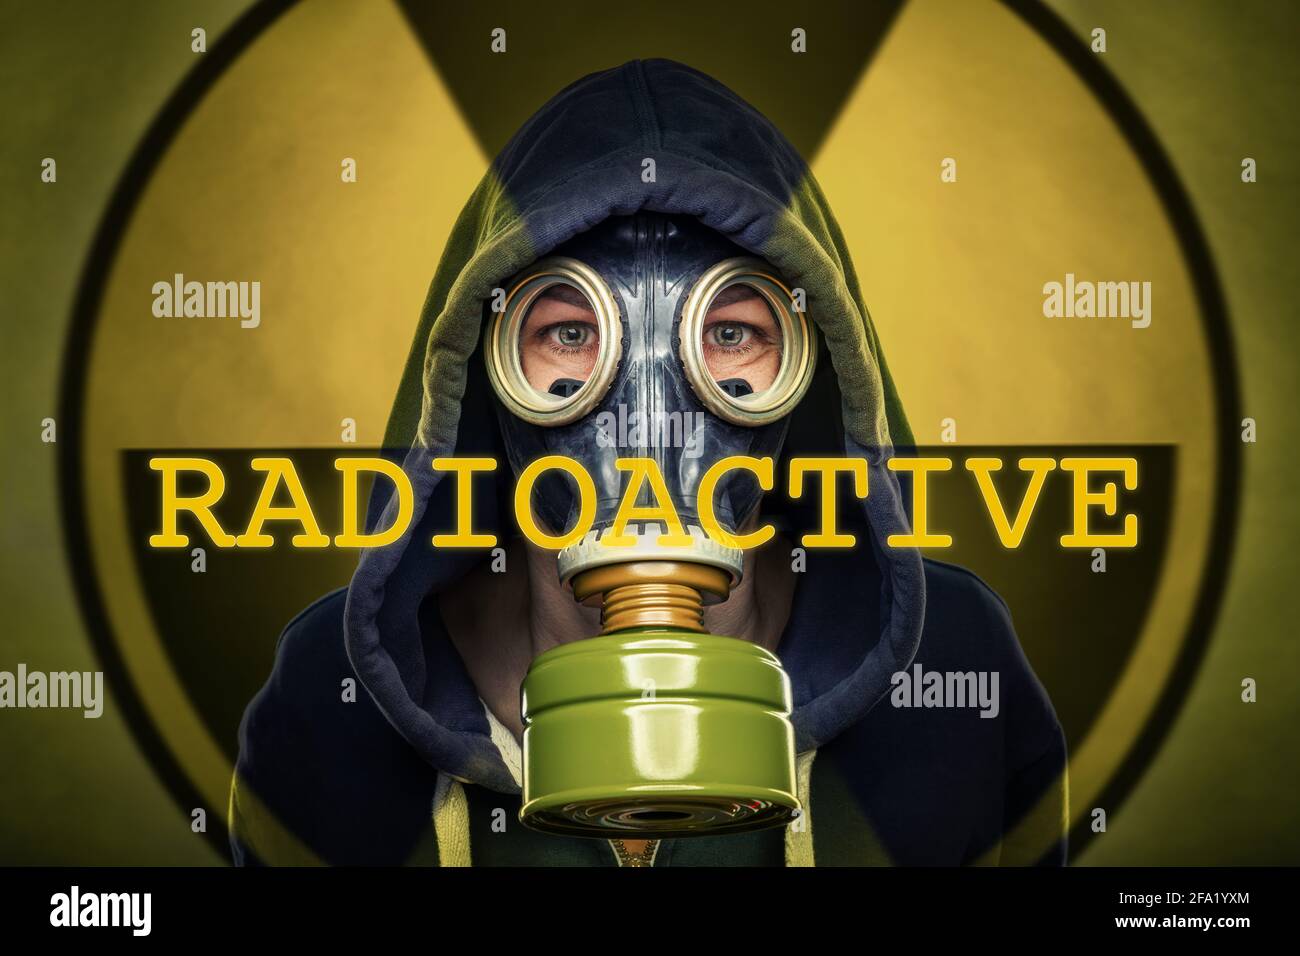 background for a radioactive issue Stock Photo